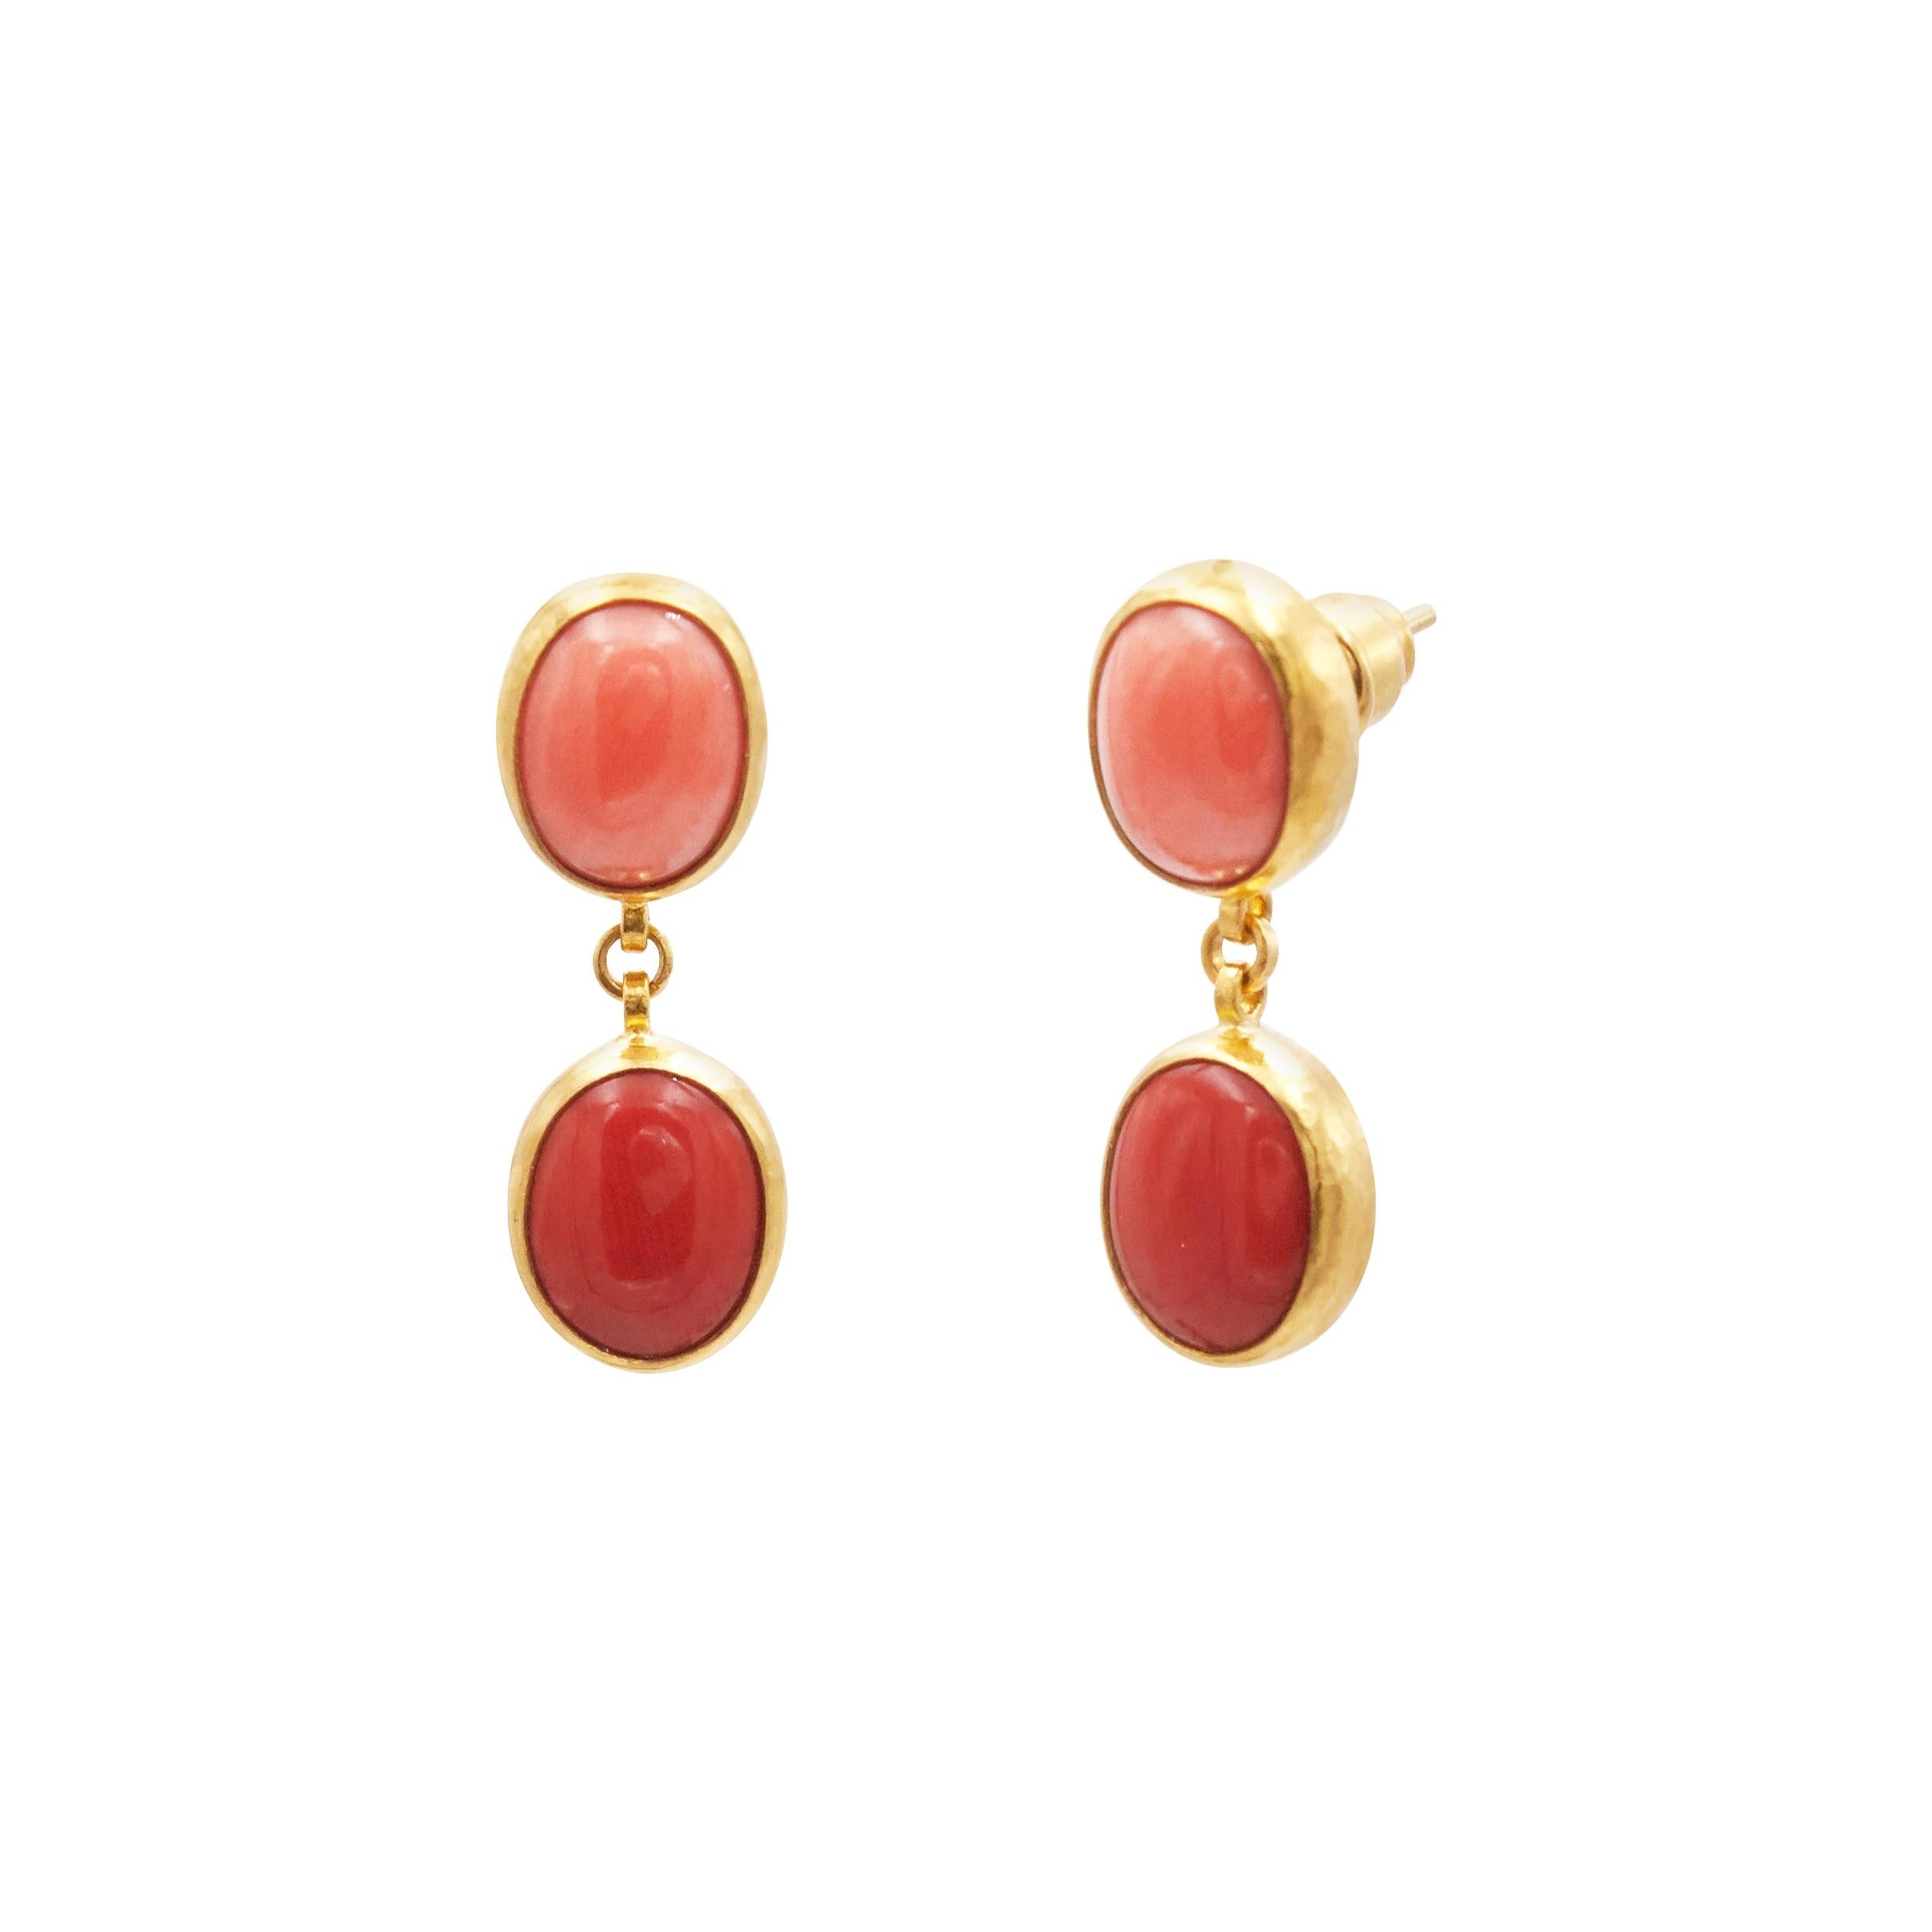 GURHAN 24 Karat Hammered Yellow Gold and Coral Double Drop Earrings For Sale